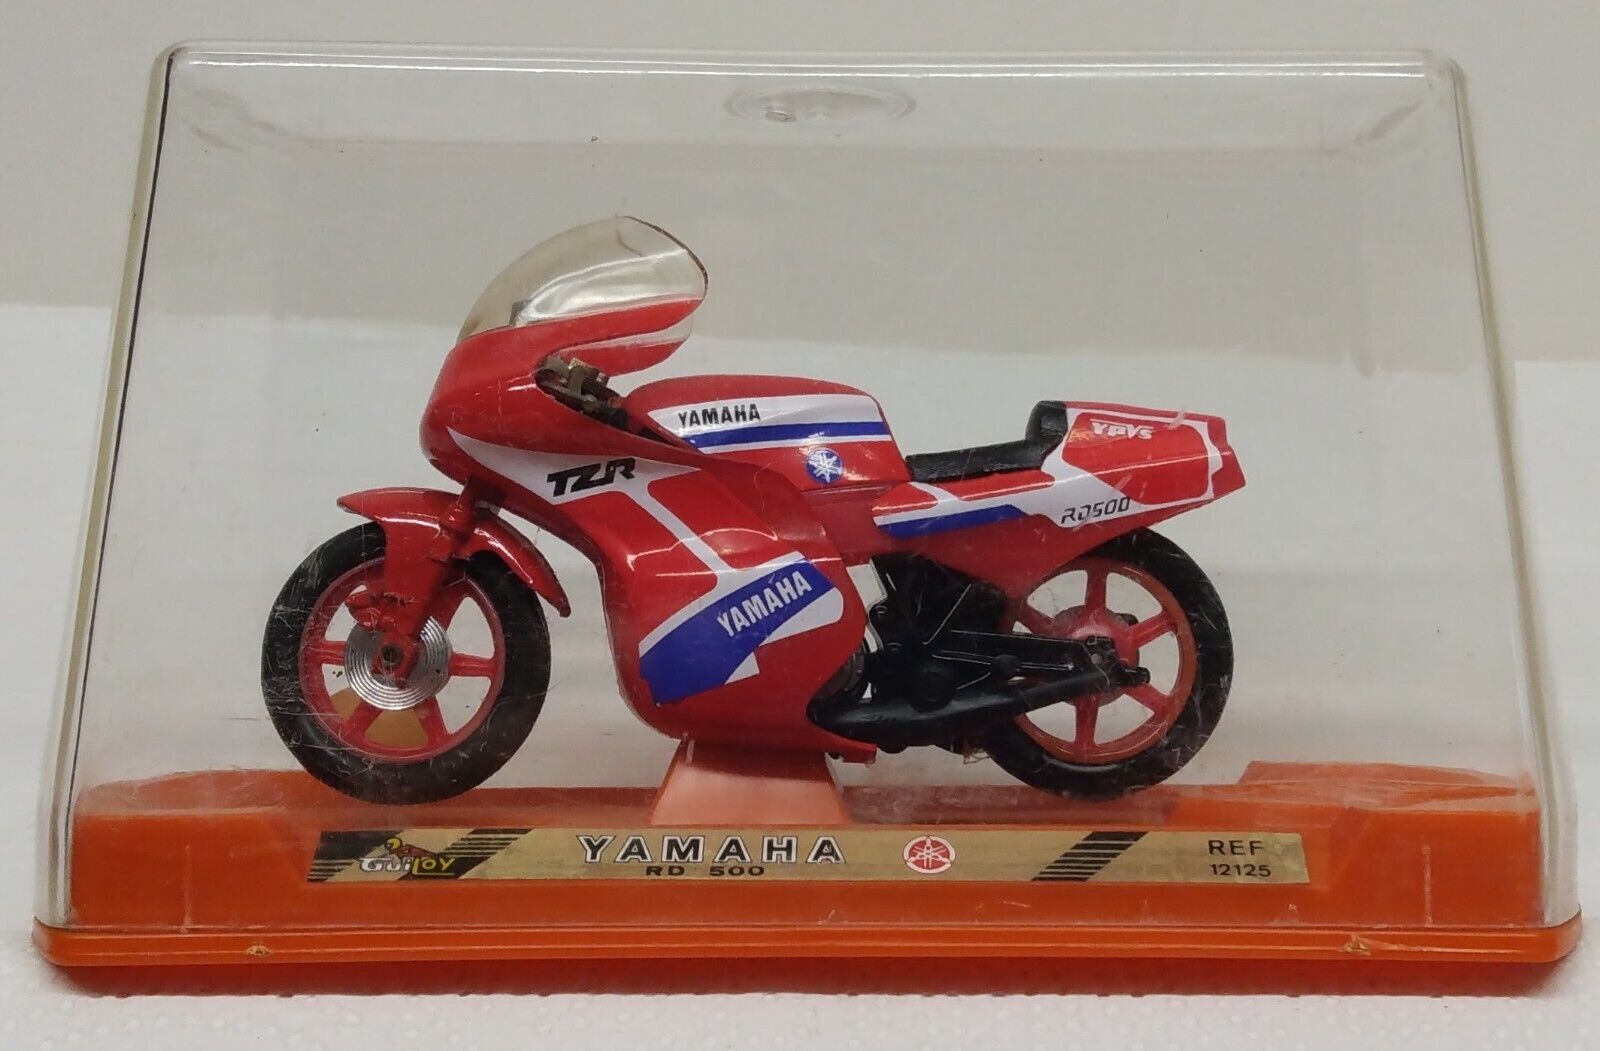 1:18 SCALE YAMAHA RD500 Motorcycle: made in SPAIN by GUILOY